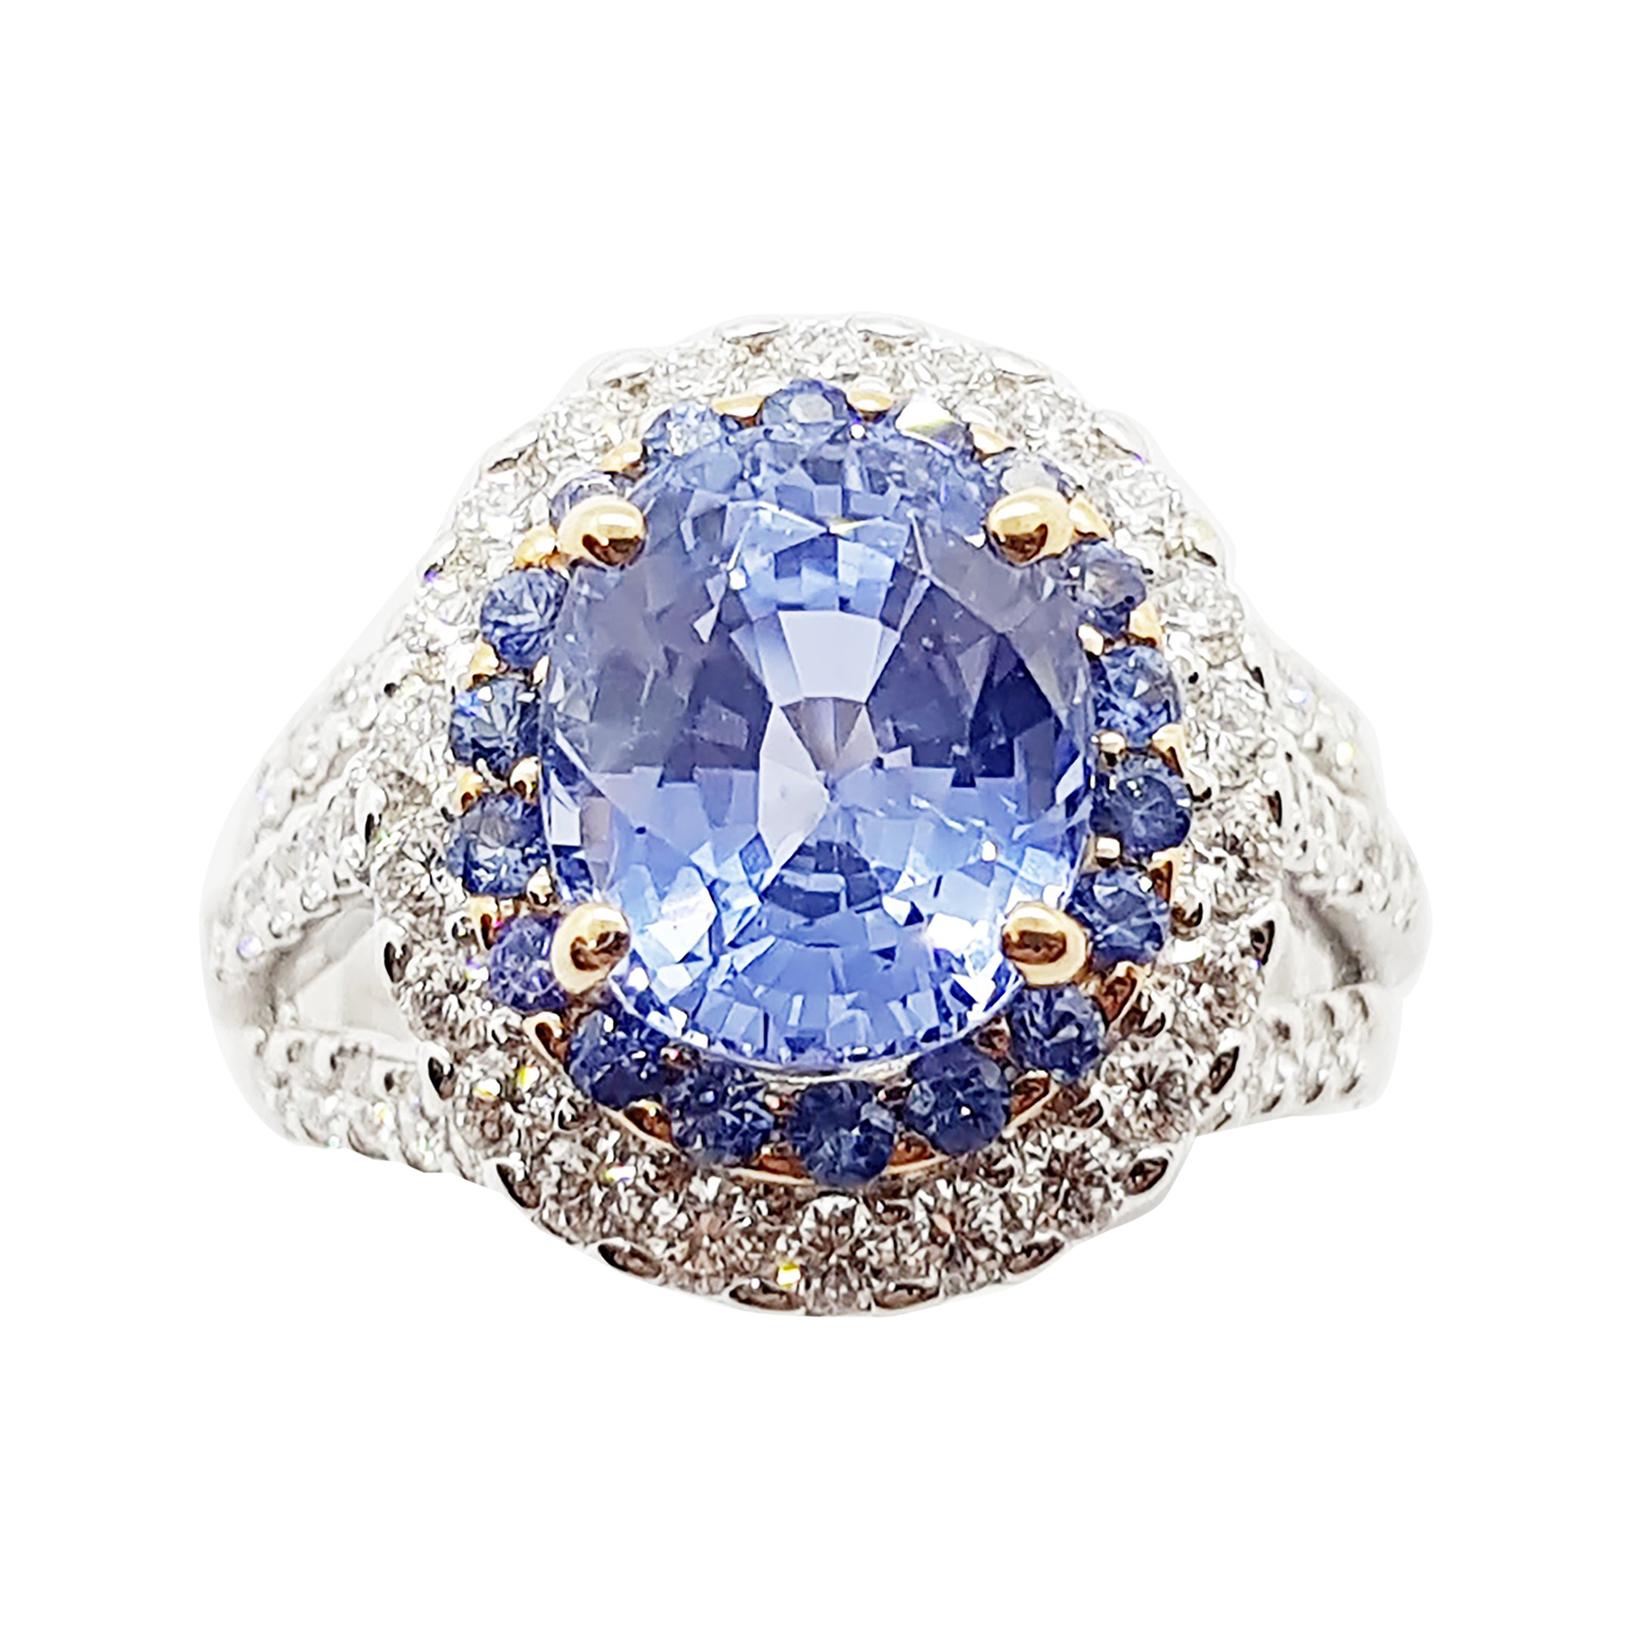 GIA Certified 5cts Ceylon Blue Sapphire with Diamond Ring Set in 18K White Gold 